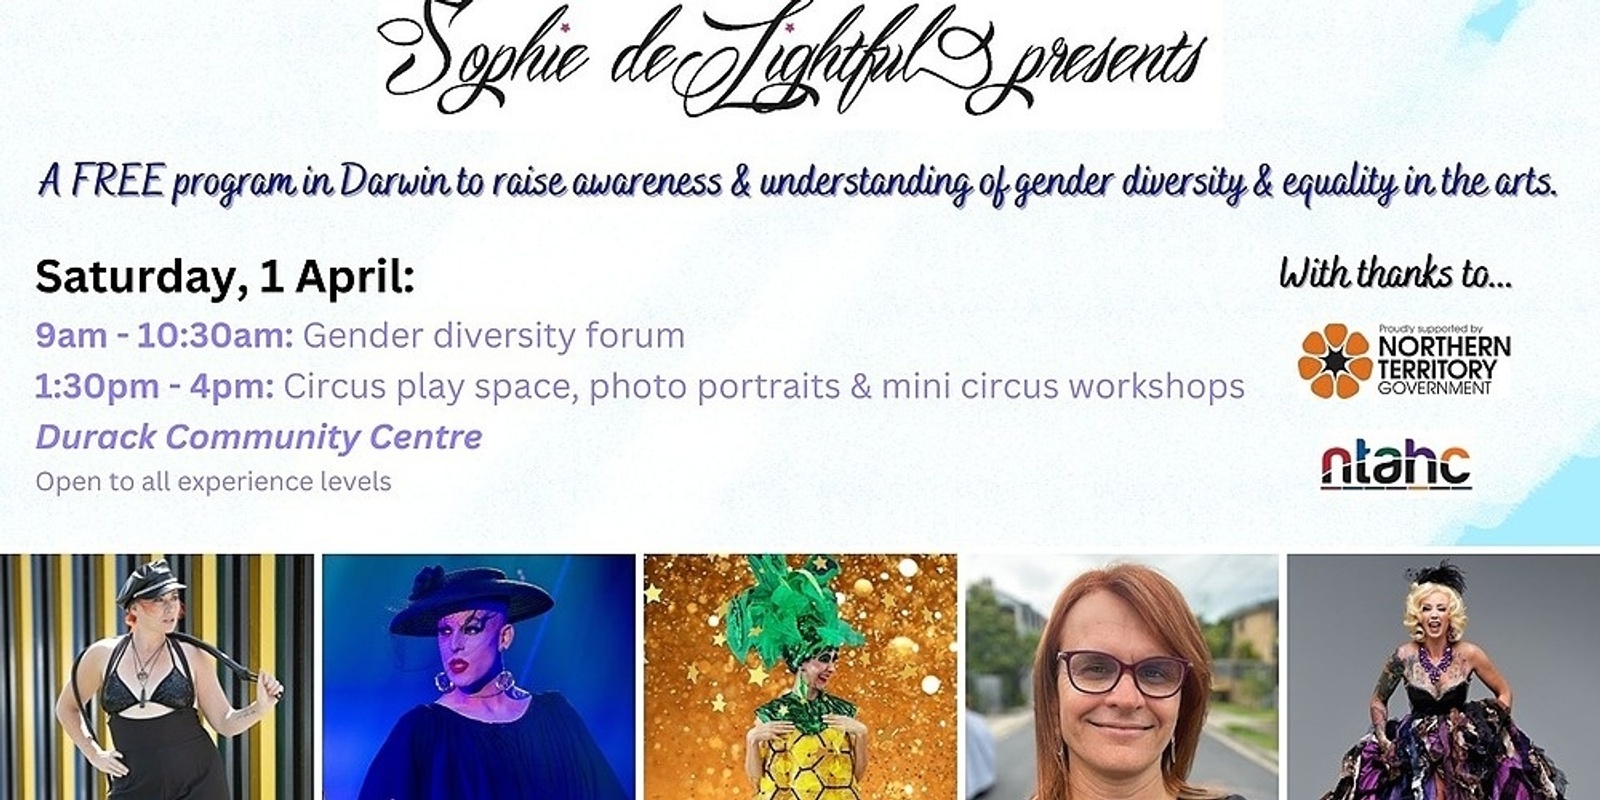 Banner image for Sophie delightful Presents... Gender Diversity in the Arts: Free Circus Program